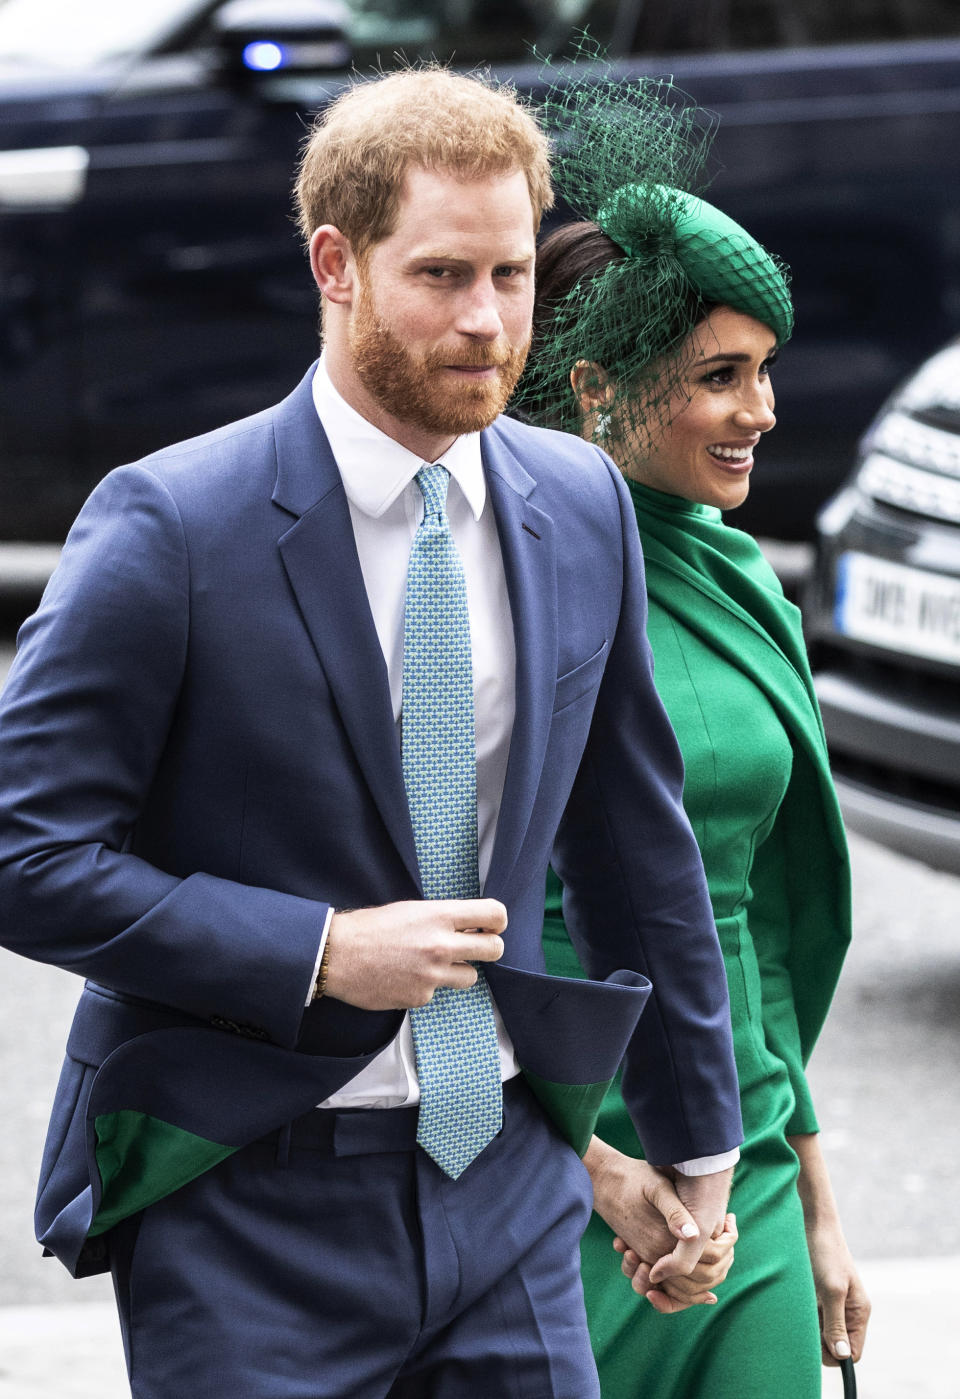 FILE - In this file photo dated Monday March 9, 2020, Britain's Prince Harry and Meghan Duchess of Sussex arrive to attend the annual Commonwealth Service at Westminster Abbey in London. The first instalment of a book serialisation entitled “Finding Freedom,” published in the Times of London Saturday July 25, 2020, underscores hurt feelings caused by the decision of Harry and Meghan to go into self-imposed exile, and lays bare turmoil in the royal household before the pair walked away from their senior roles in the family. (Richard Pohle / Pool via AP, FILE)